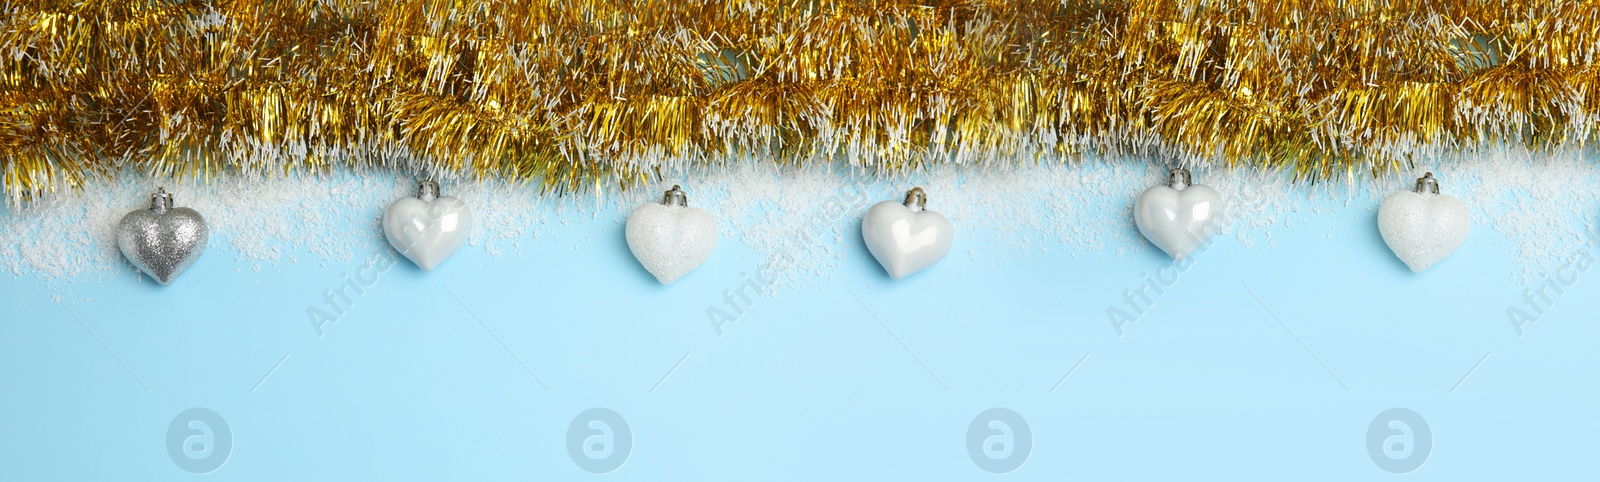 Image of Shiny golden tinsel, Christmas baubles and snow on light blue background, flat lay. Banner design